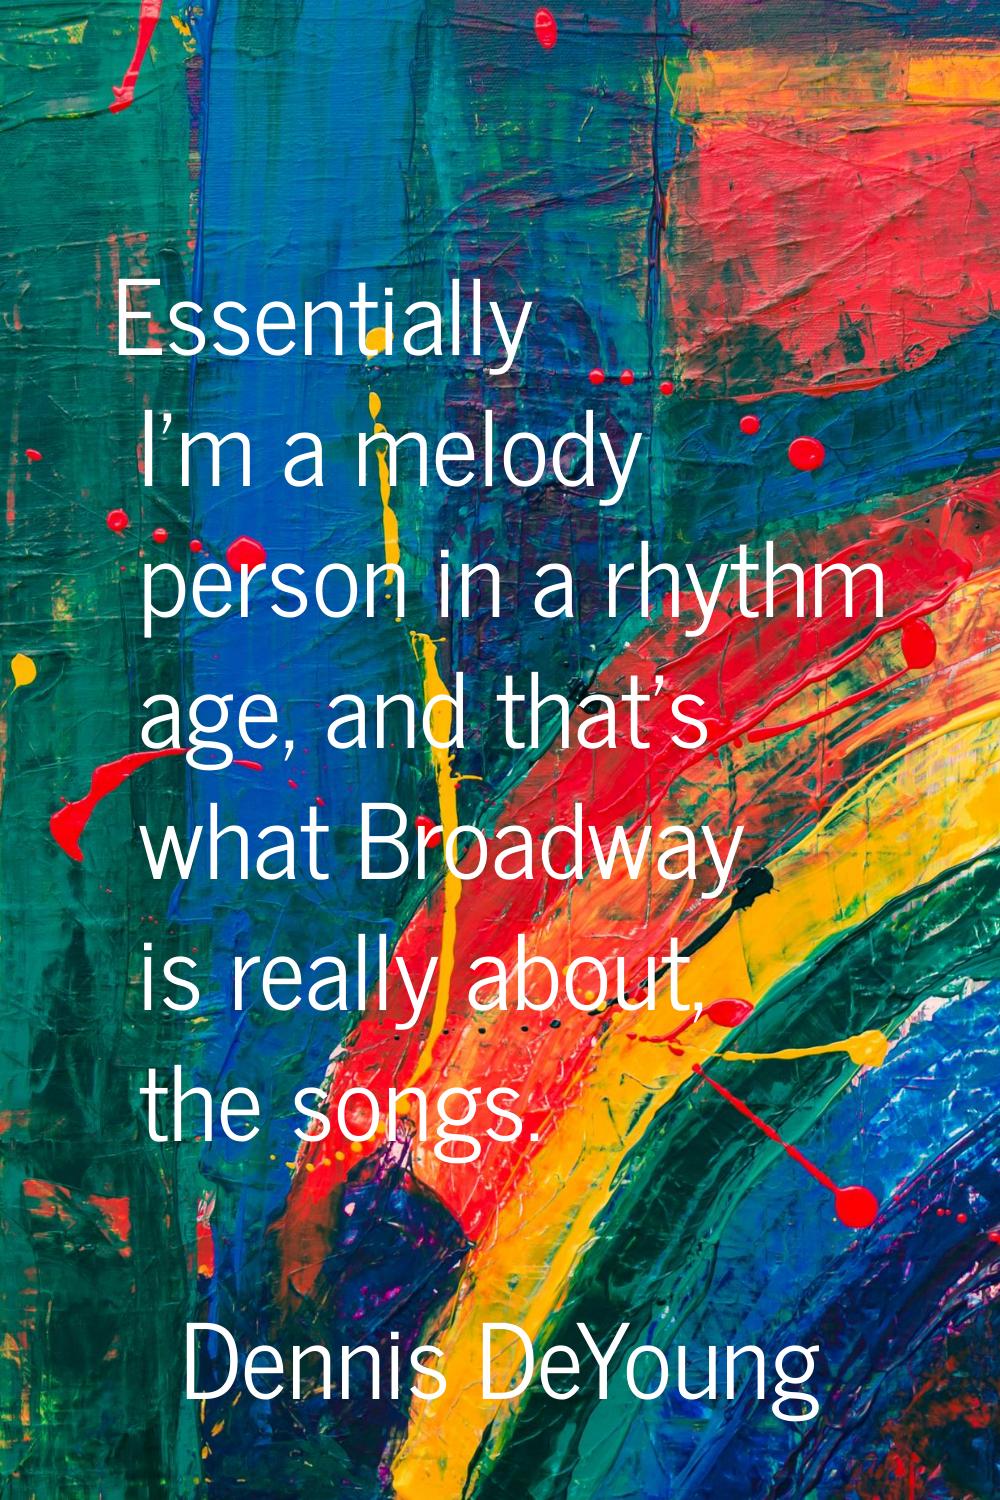 Essentially I'm a melody person in a rhythm age, and that's what Broadway is really about, the song